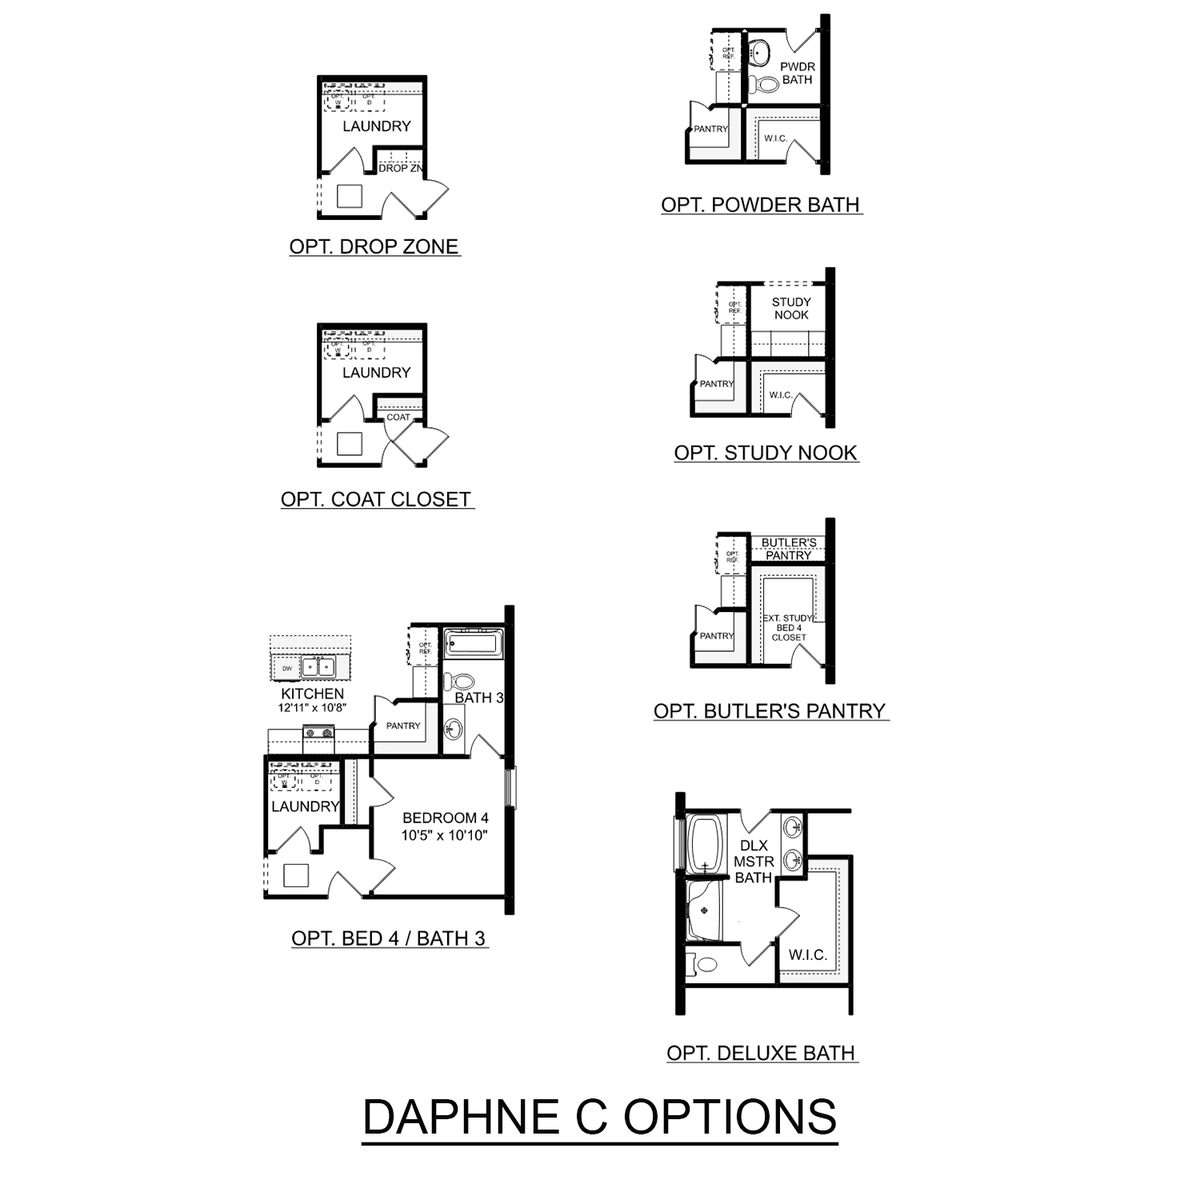 2 - The Daphne C floor plan layout for 6250 Pisgah Drive in Davidson Homes' Spragins Cove community.